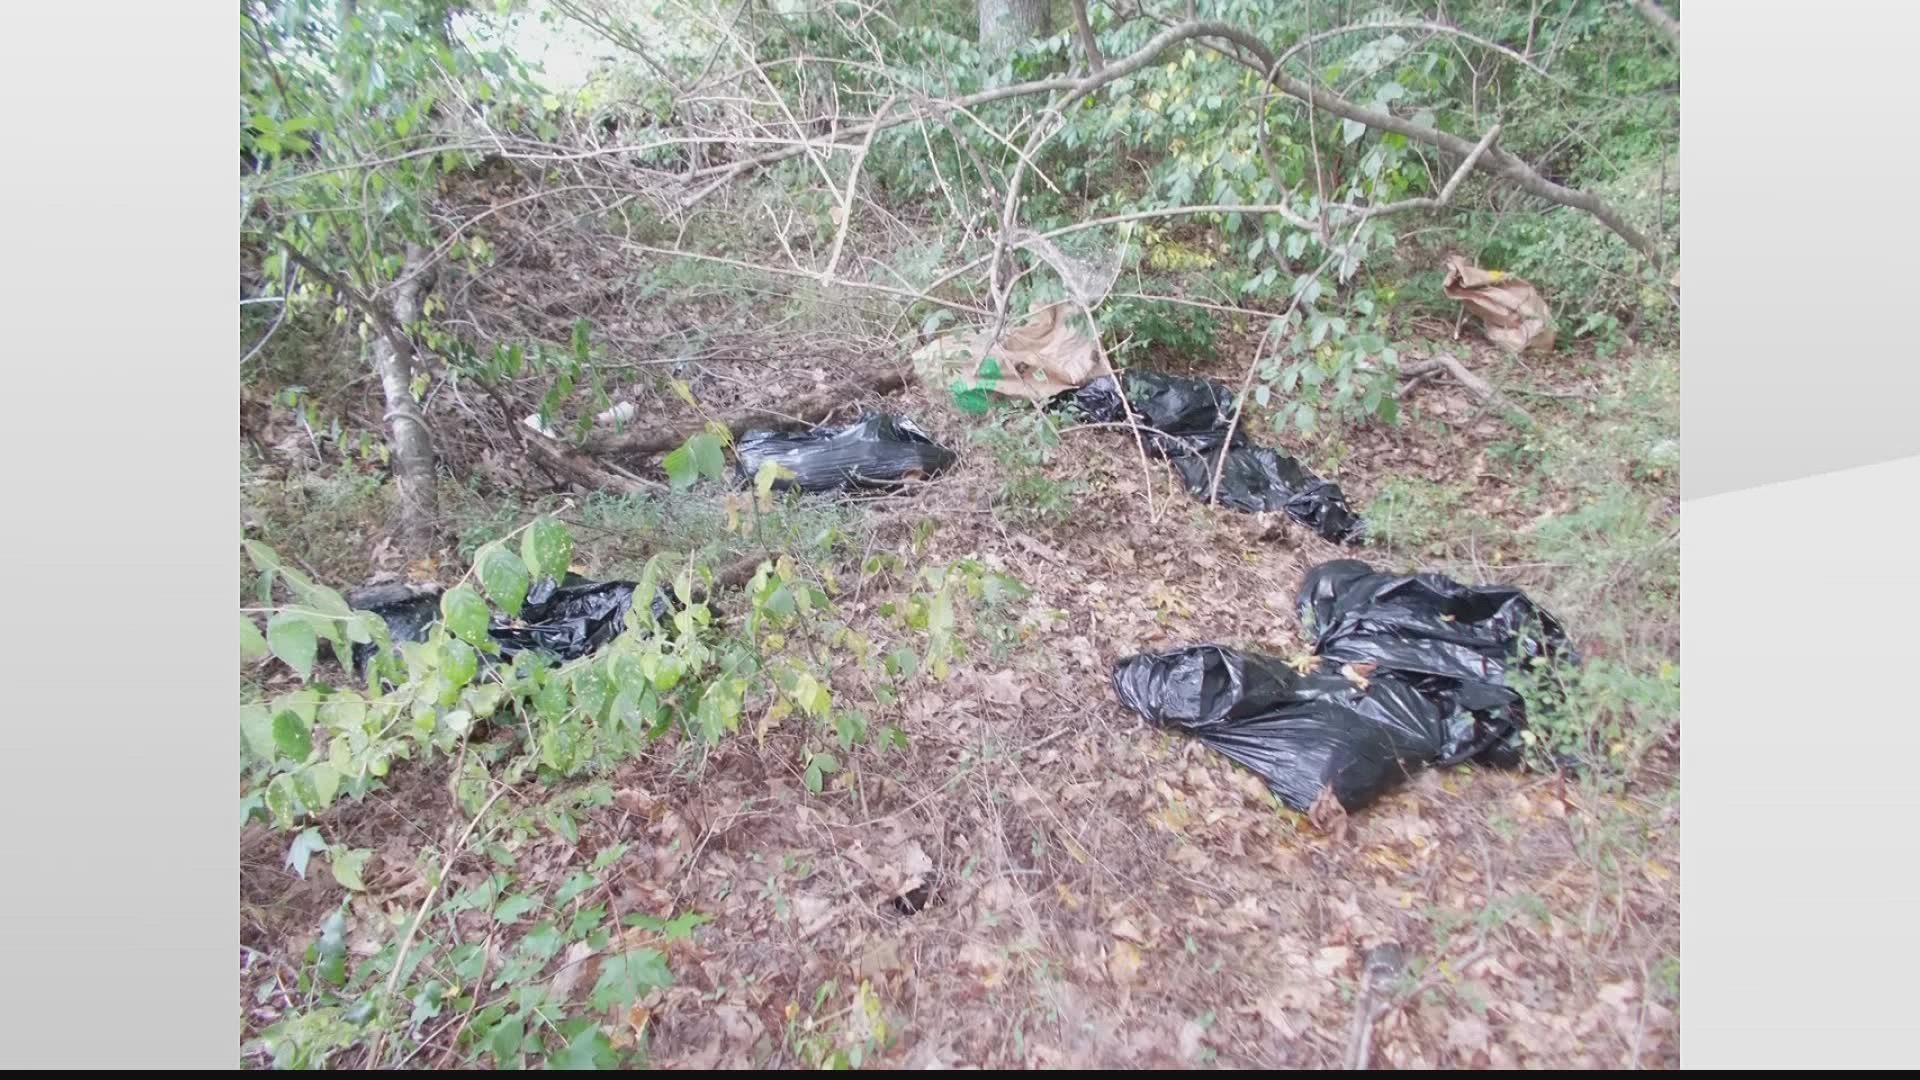 The discovery was made this week after a resident walking their dog noticed a black trash bag with an animal leg sticking out of it.